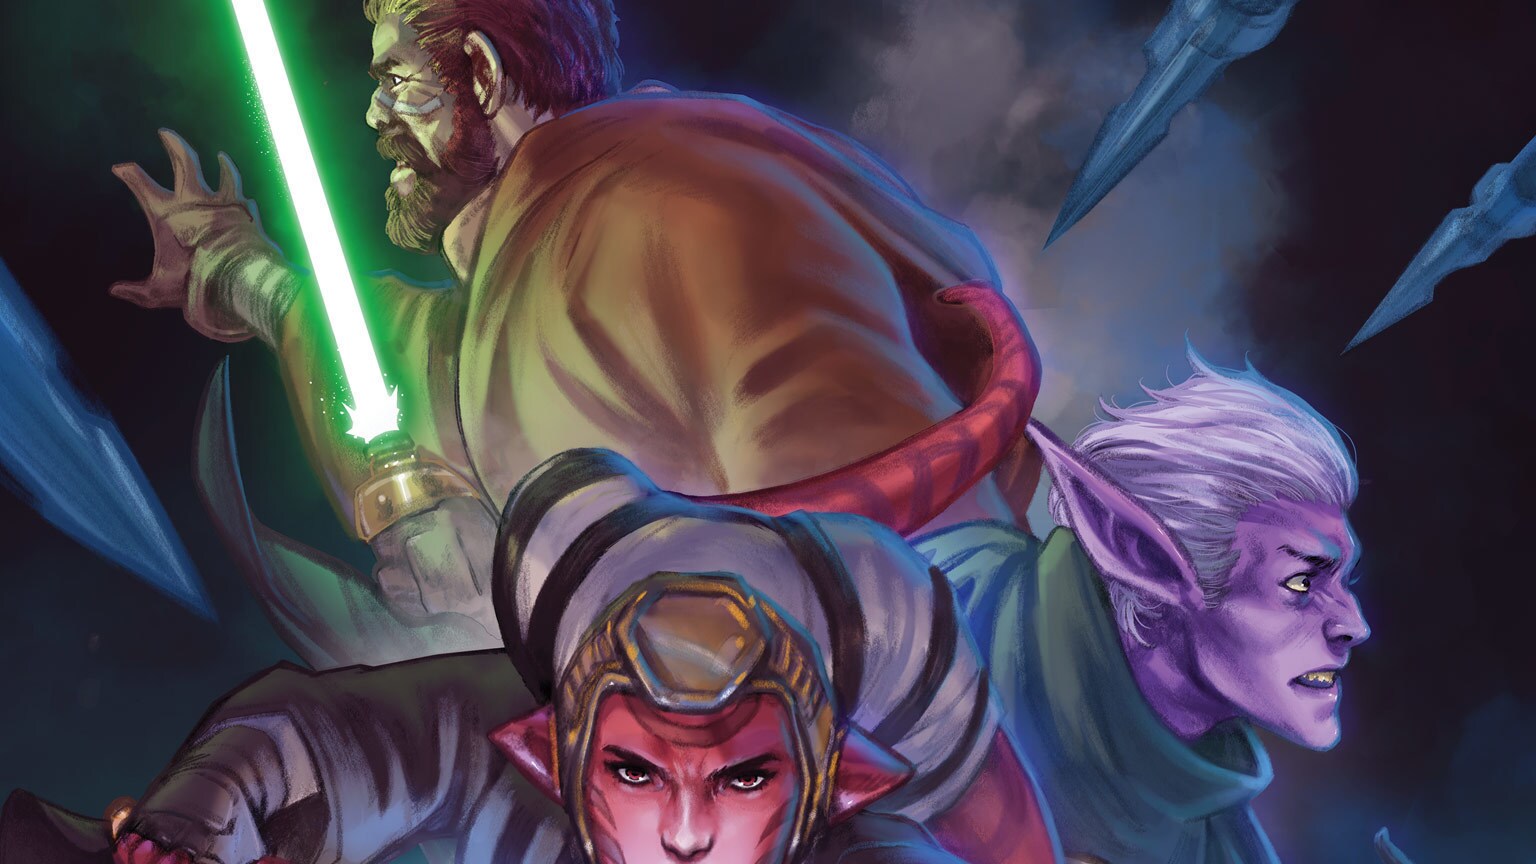 The Search for a Deadly Dark Sider Begins in Marvel’s Star Wars: The High Republic #2 – Exclusive Preview